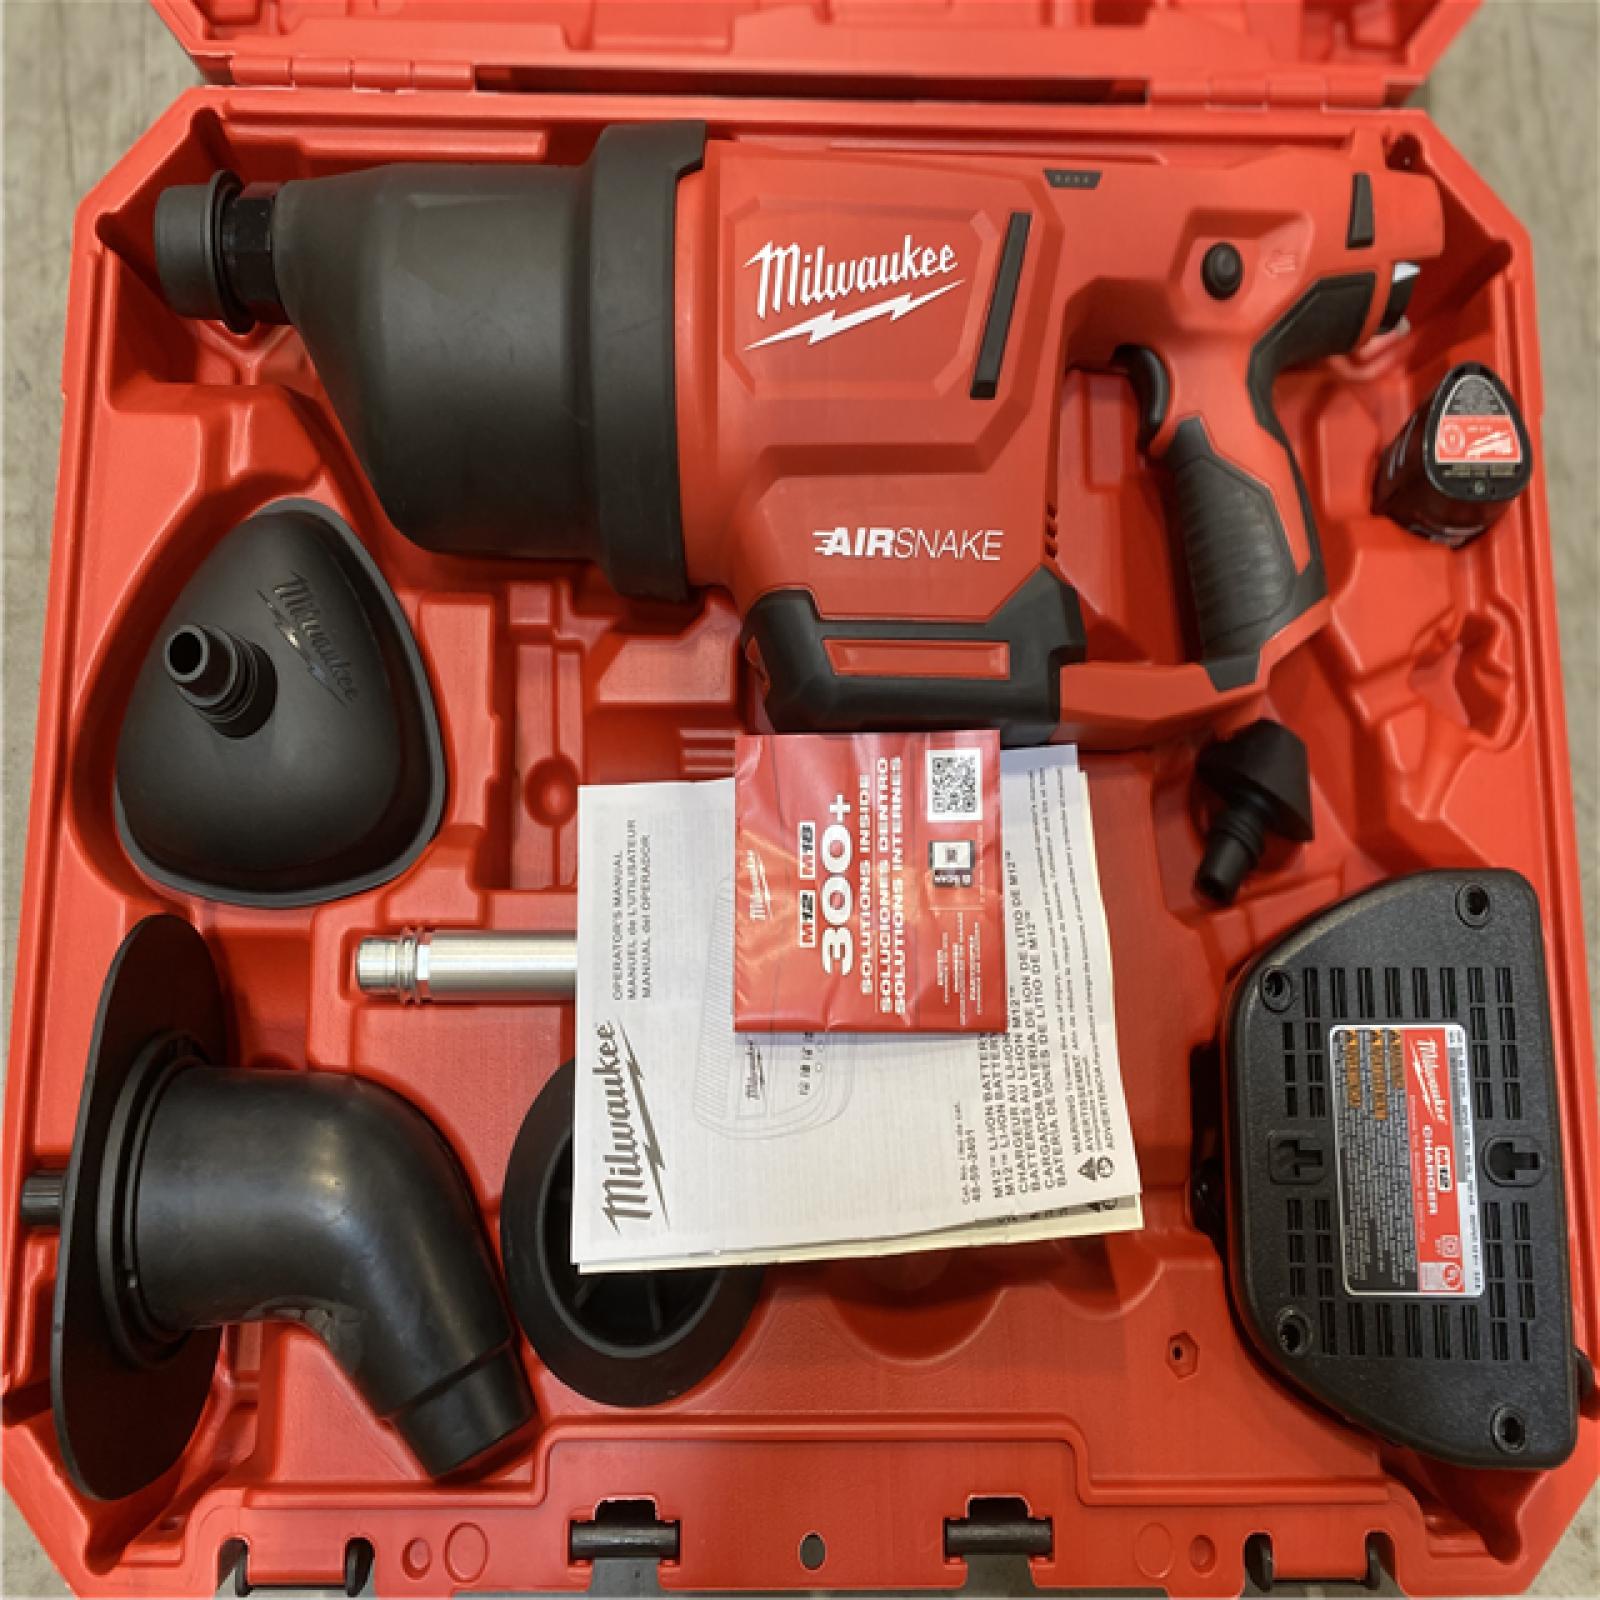 DALLAS LOCATION- Milwaukee M12 12-Volt Lithium-Ion Cordless Drain Cleaning Airsnake Air Gun Kit with (1) 2.0Ah Battery, Toilet Attachments